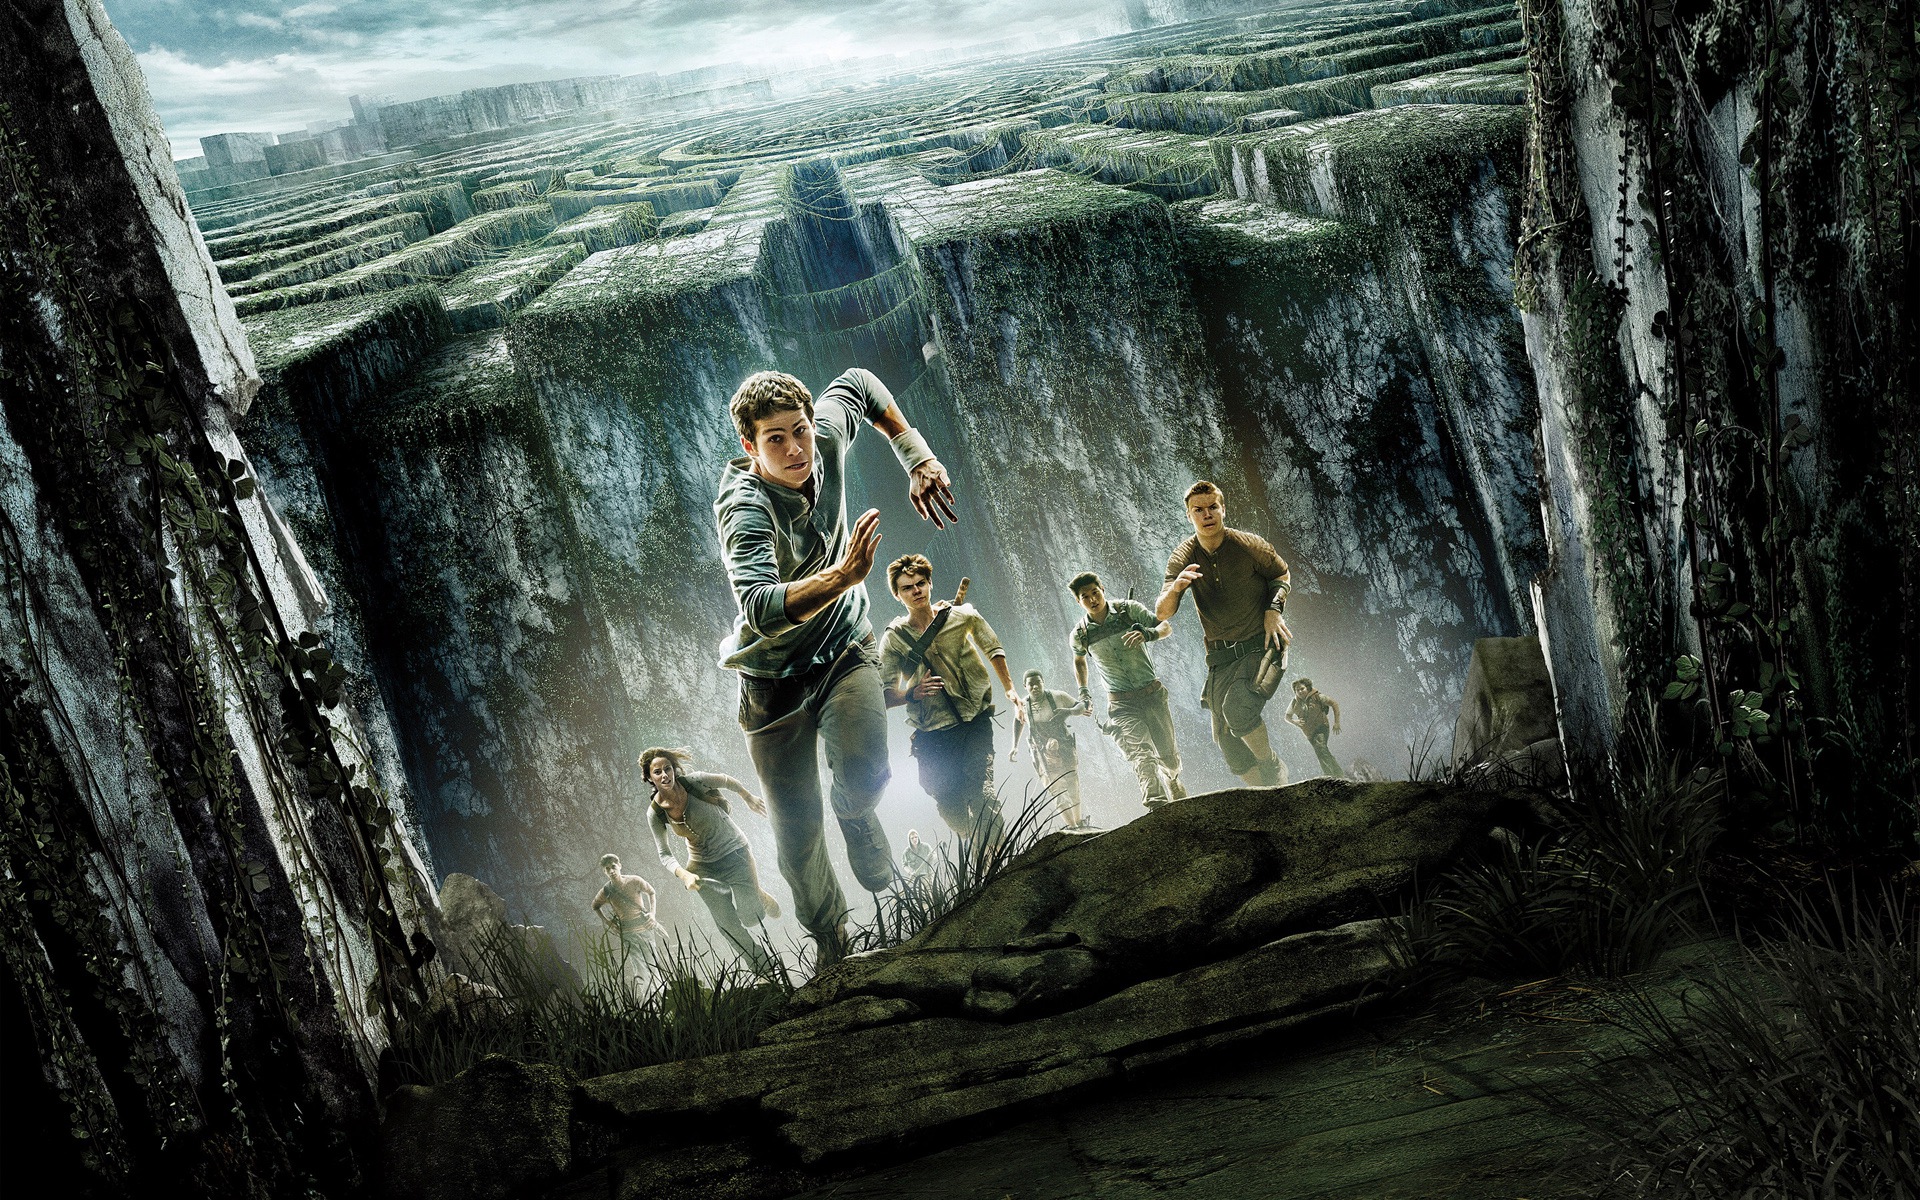 The Maze Runner HD movie wallpapers #6 - 1920x1200